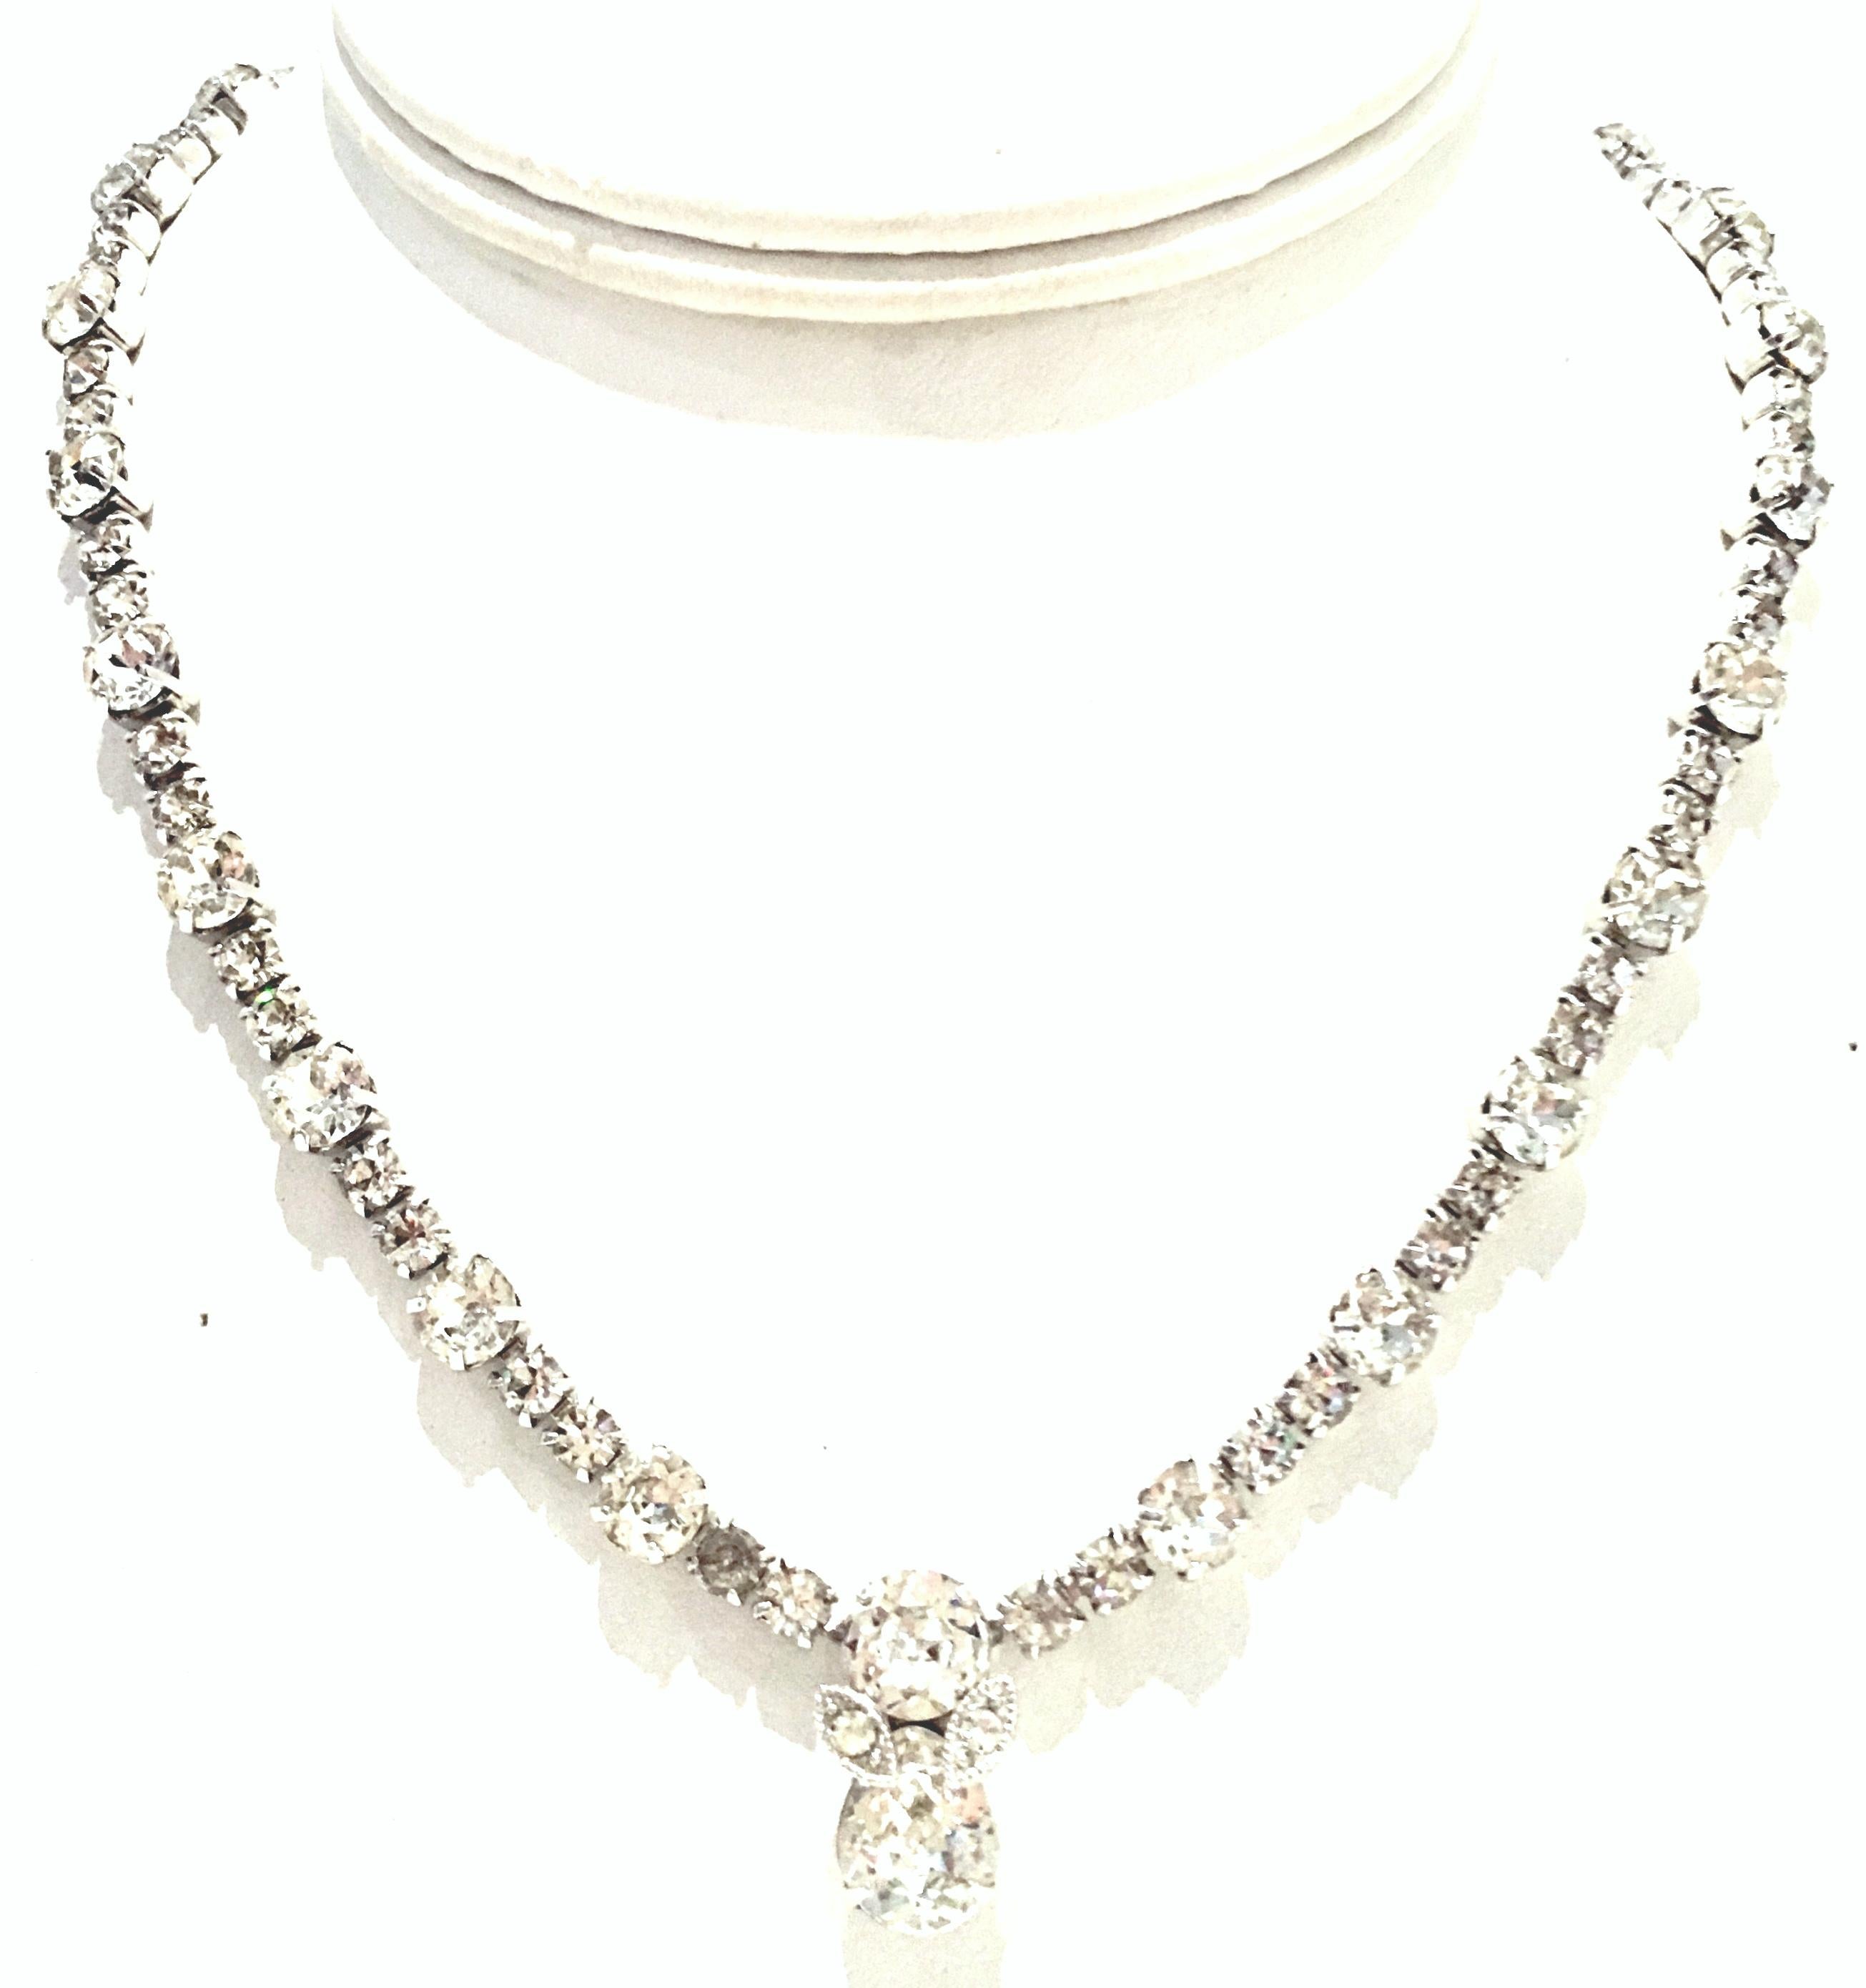 20th Century Silver & Swarovski Crystal Choker Style Necklace By, Eisenberg. This silver rhodium plate necklace features the highest quality of prong set colorless stones with a central and large ornament of approximately, .75